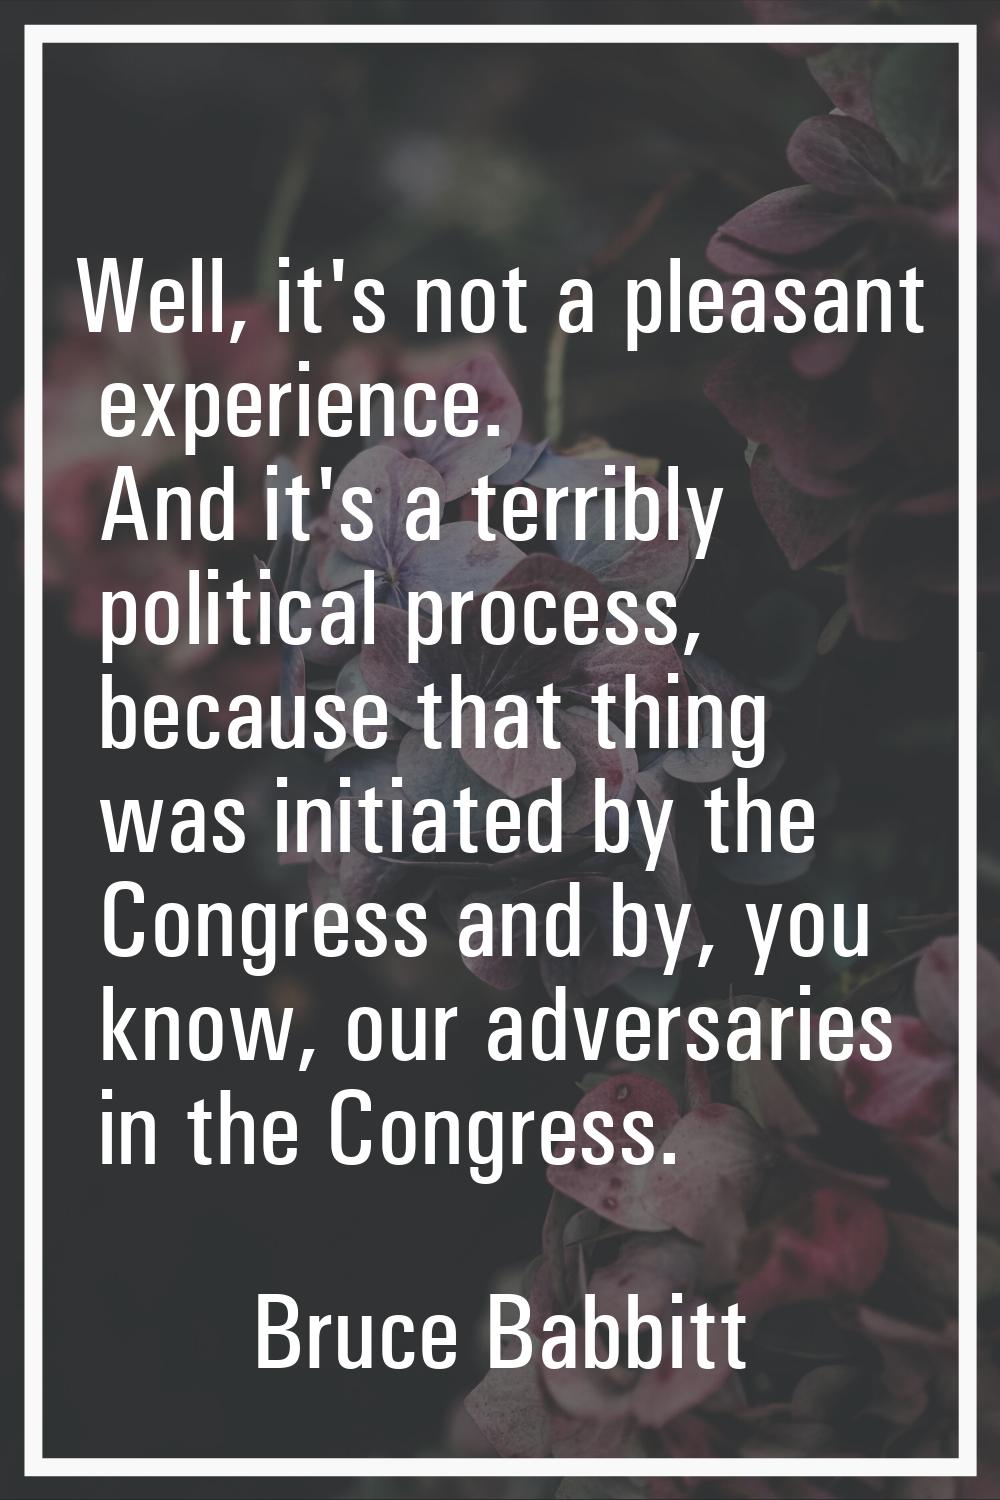 Well, it's not a pleasant experience. And it's a terribly political process, because that thing was